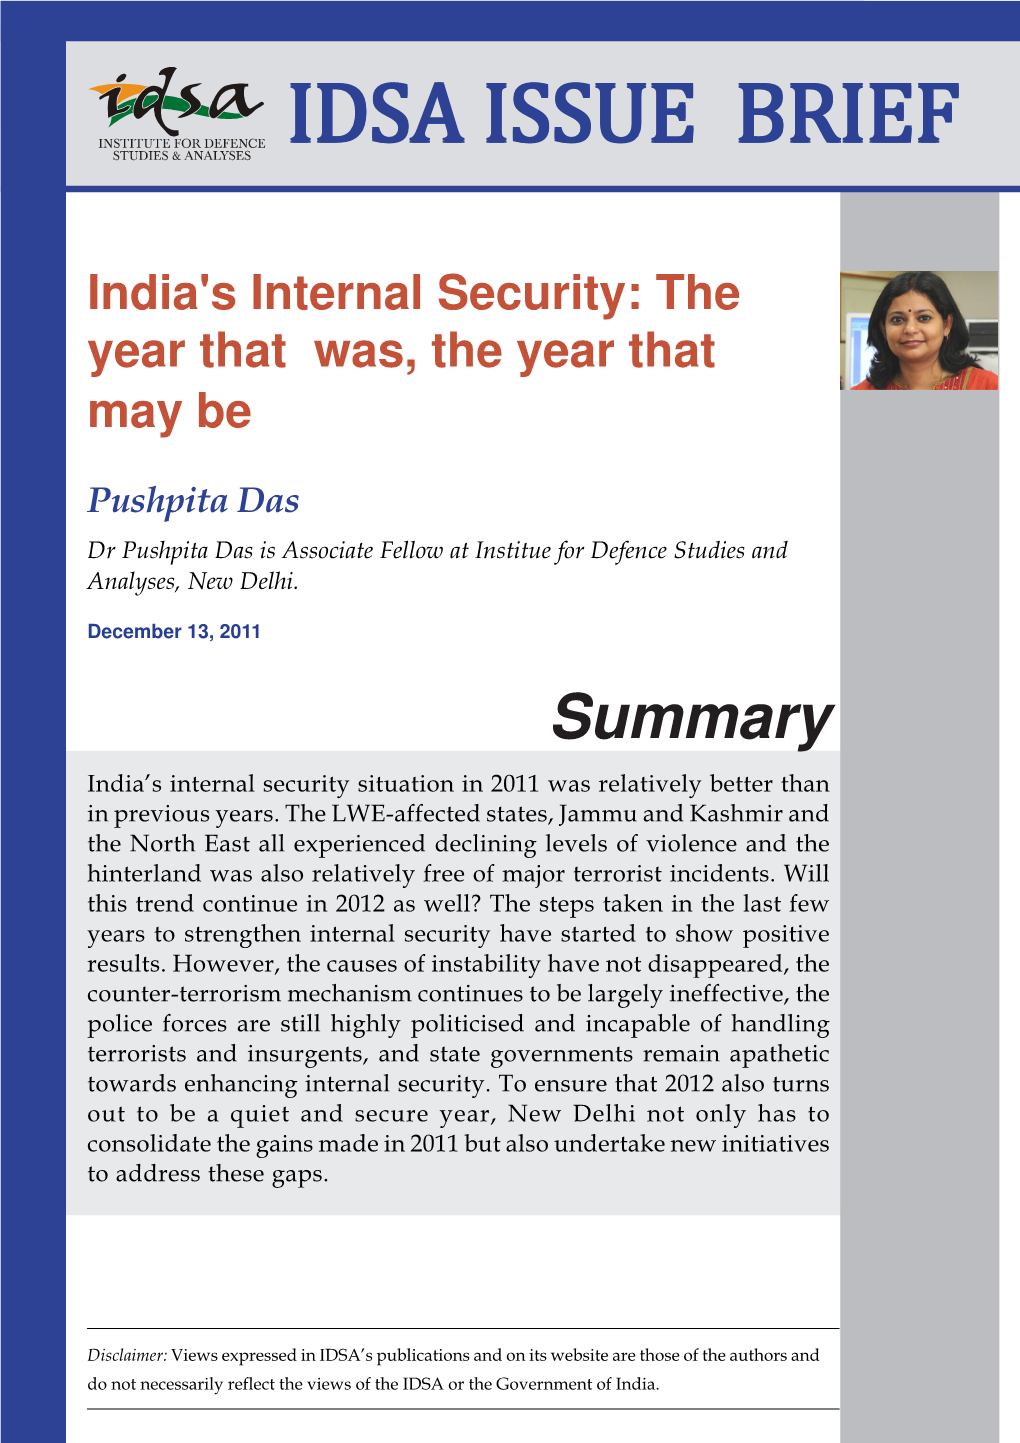 India's Internal Security: the Year That Was, the Year That May Be